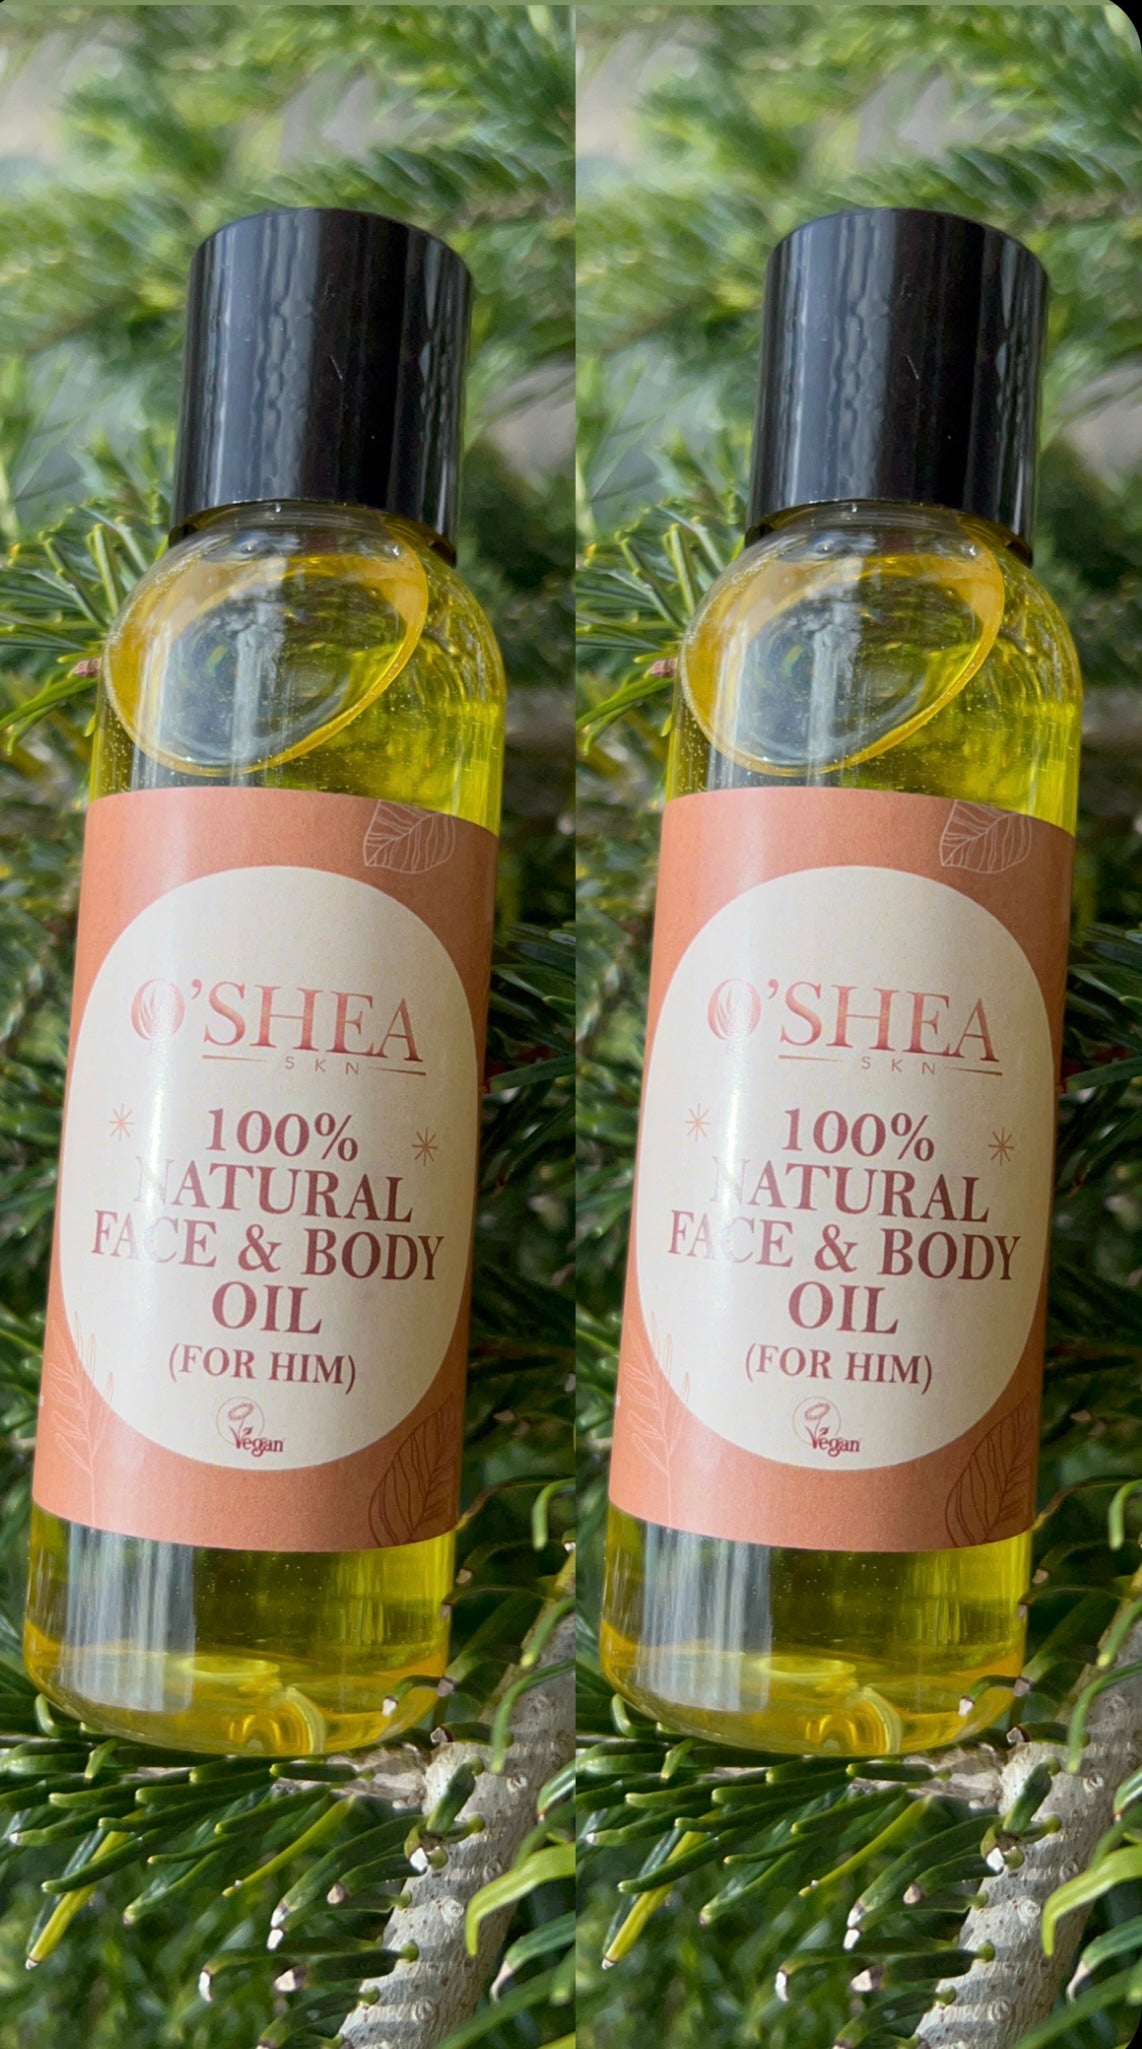 His 100% Natural Face & Body Oil X2